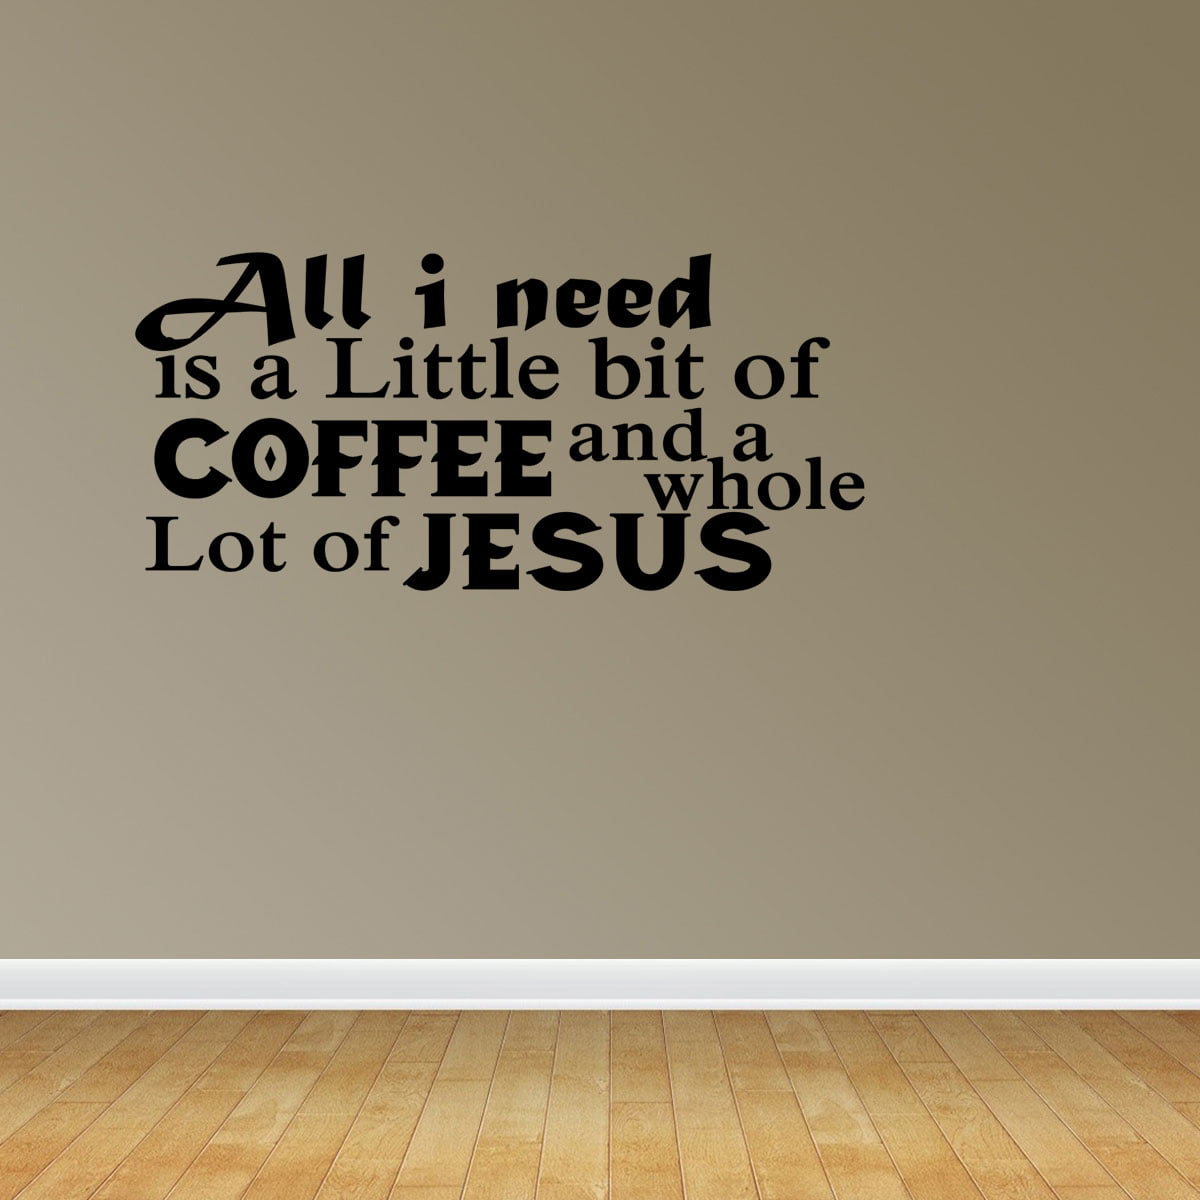 A Bit of Coffee & Whole Lot of Jesus Picture GOD Wooden Wall Hanging Sign Plaque 